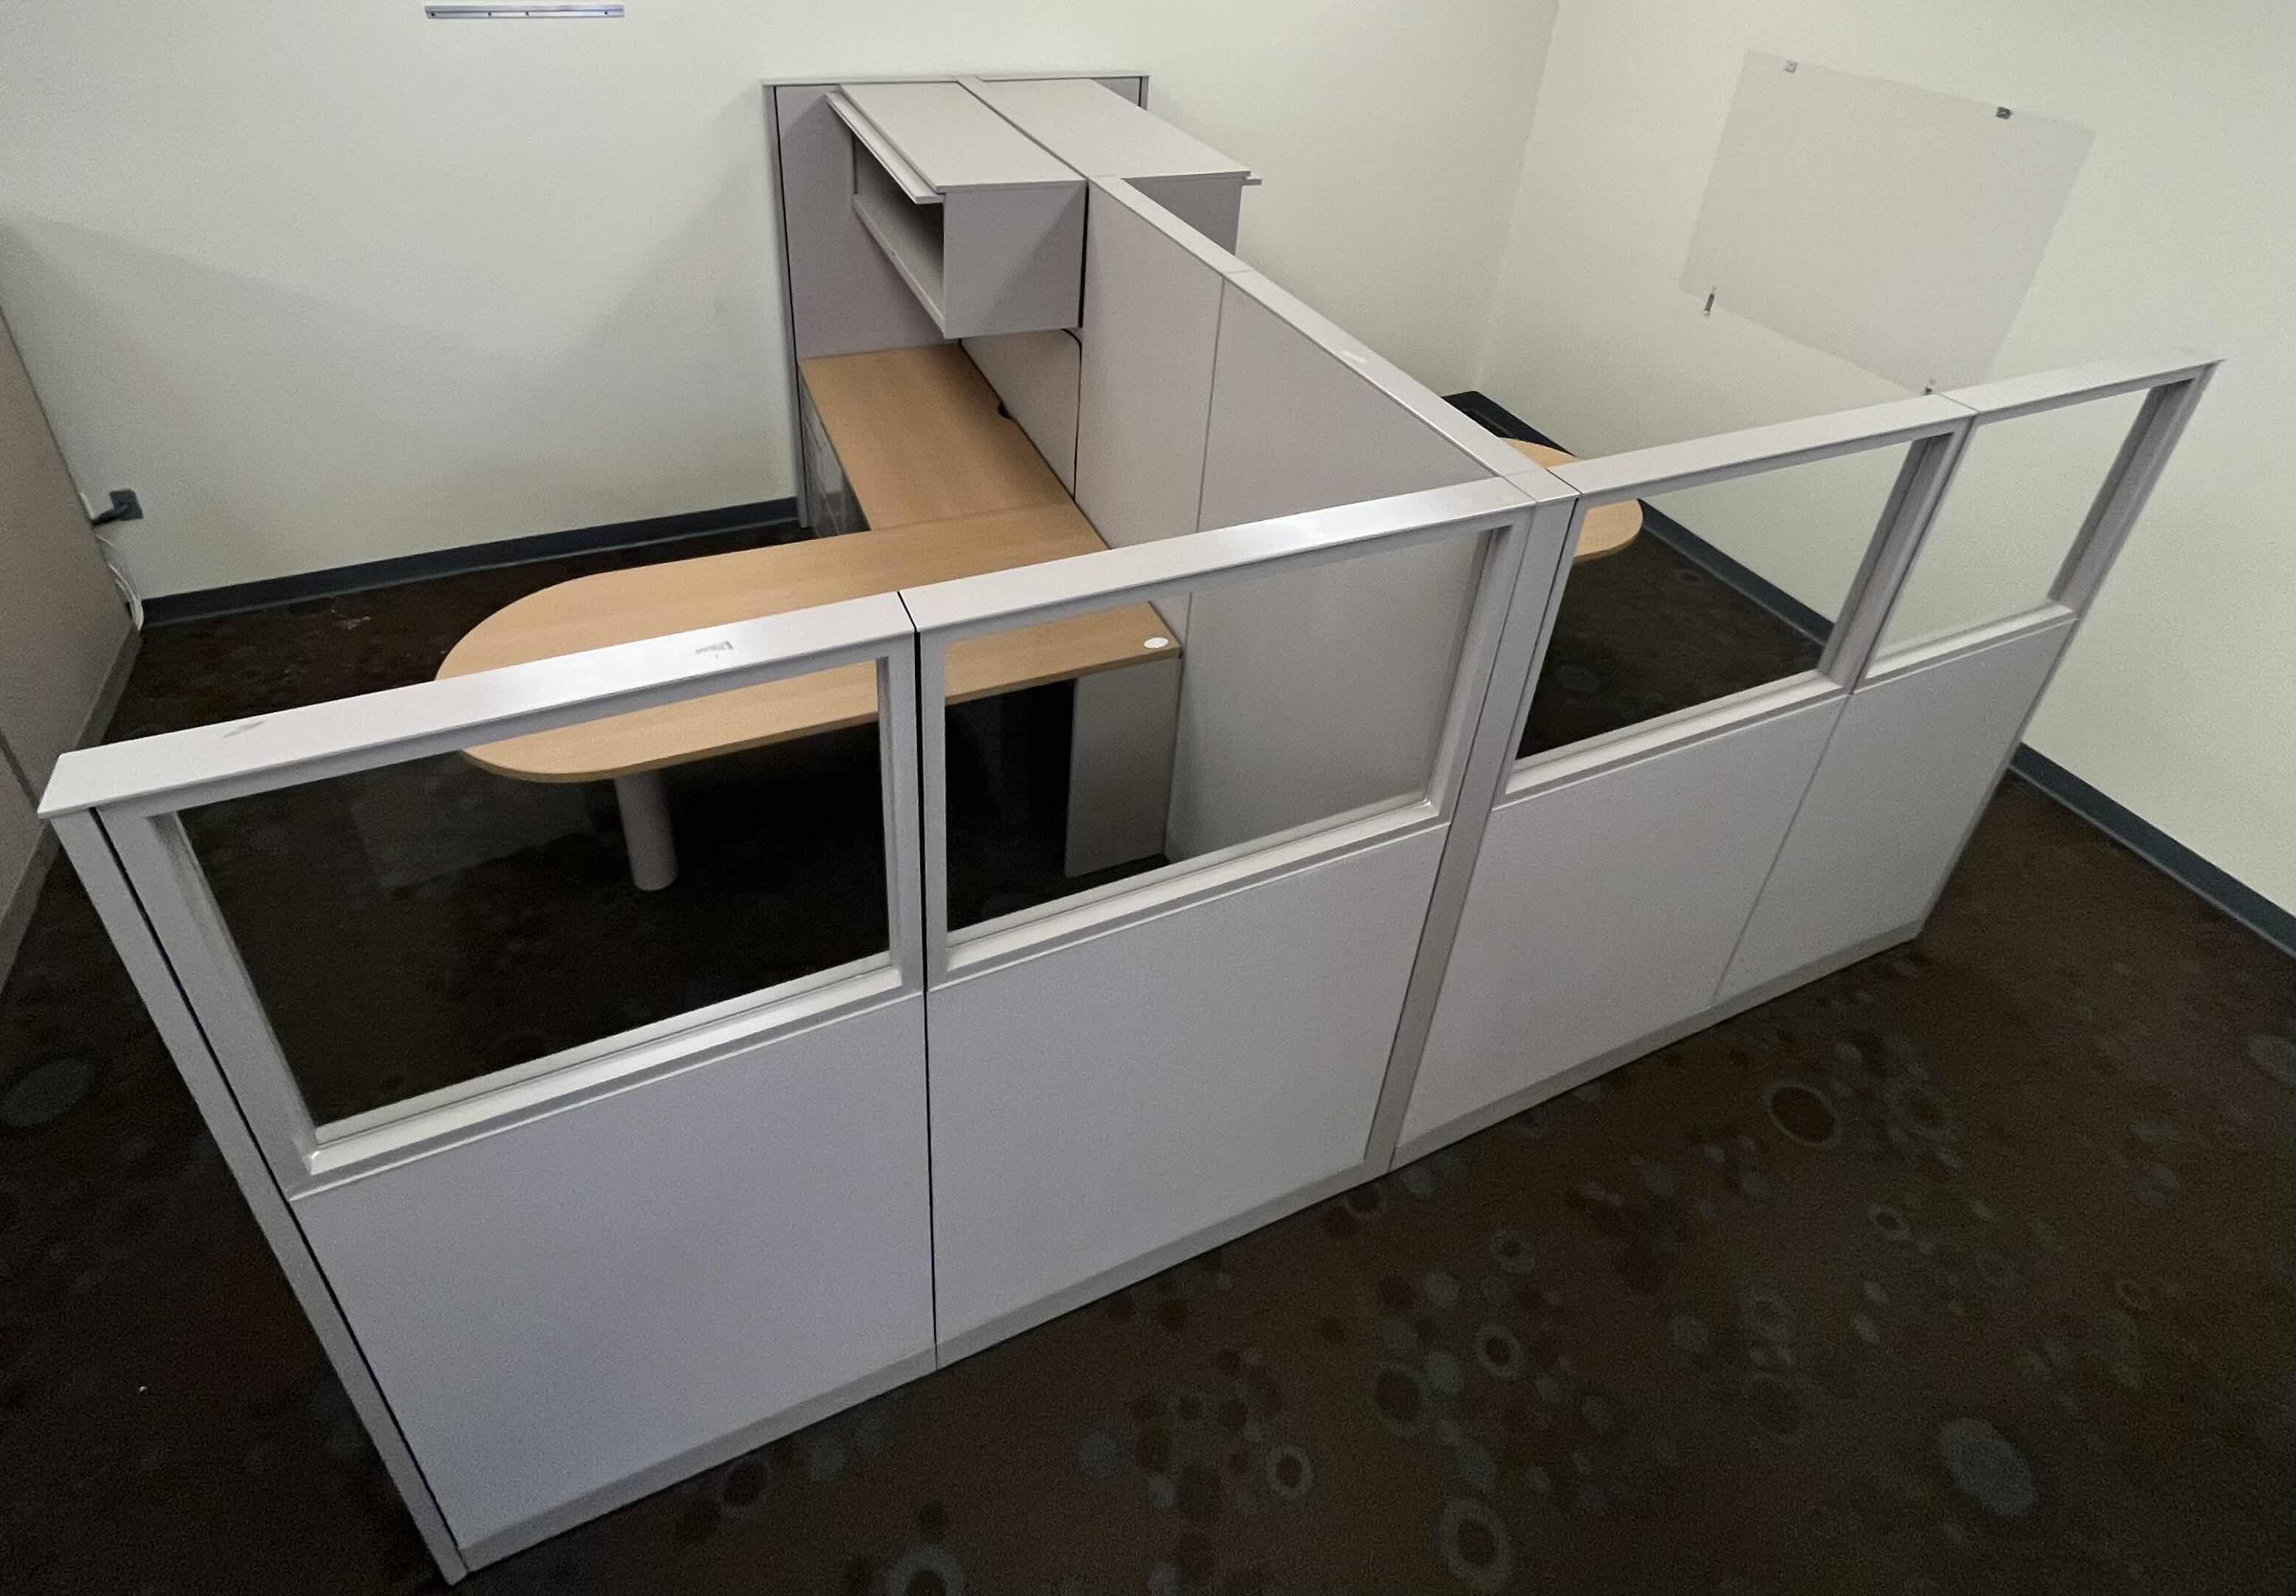 Photo 1 of CUBICLE DUAL OFFICE SET UP W 2 TABLES & 2 WALL CABINETS (OVERALL DIMENSIONS 138” X 122” H66.5”) READ NOTES